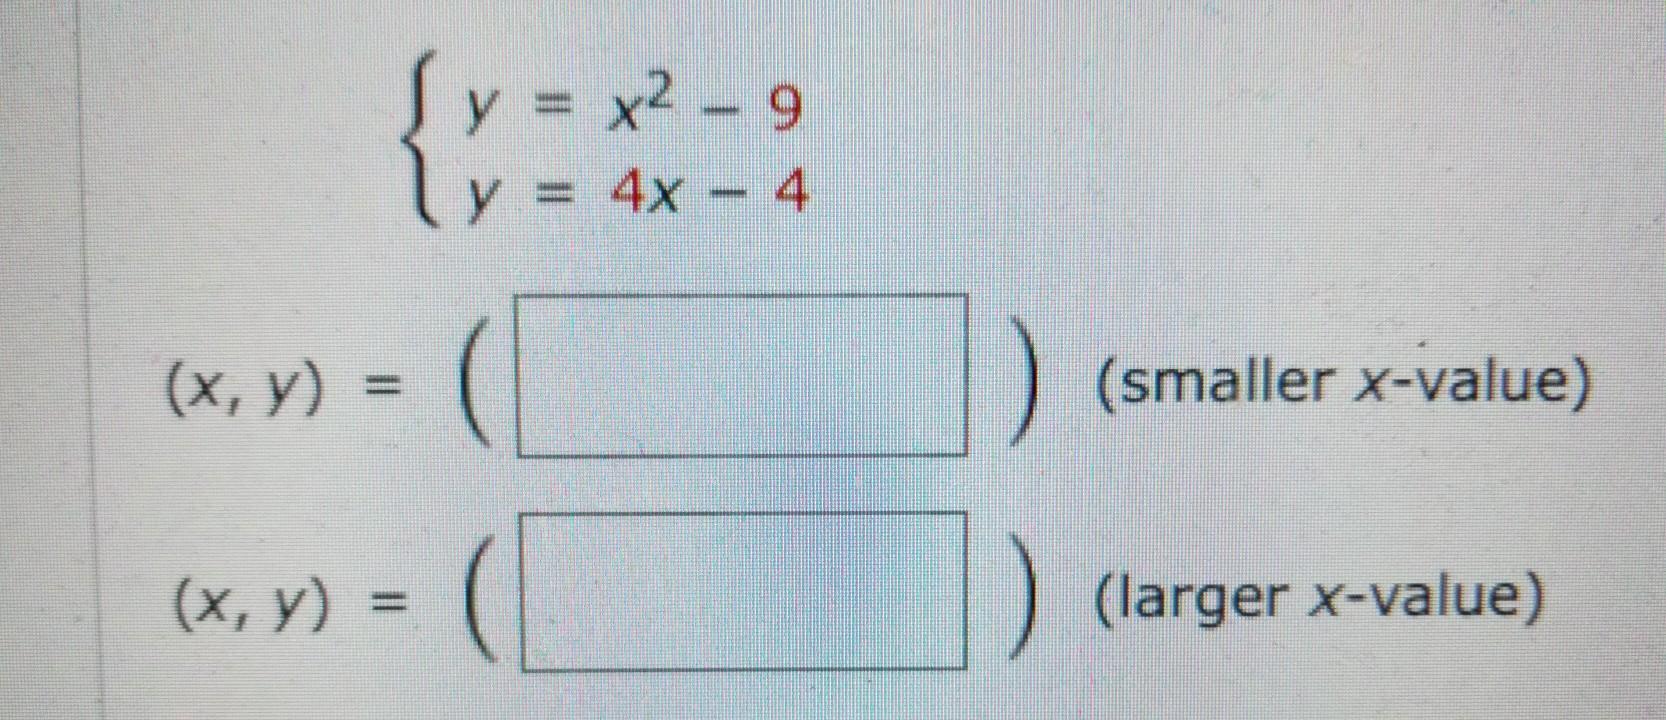 NO LINKS!! Use The Method Of Substitution To Solve The System. (If There's No Solution, Enter No Solution).